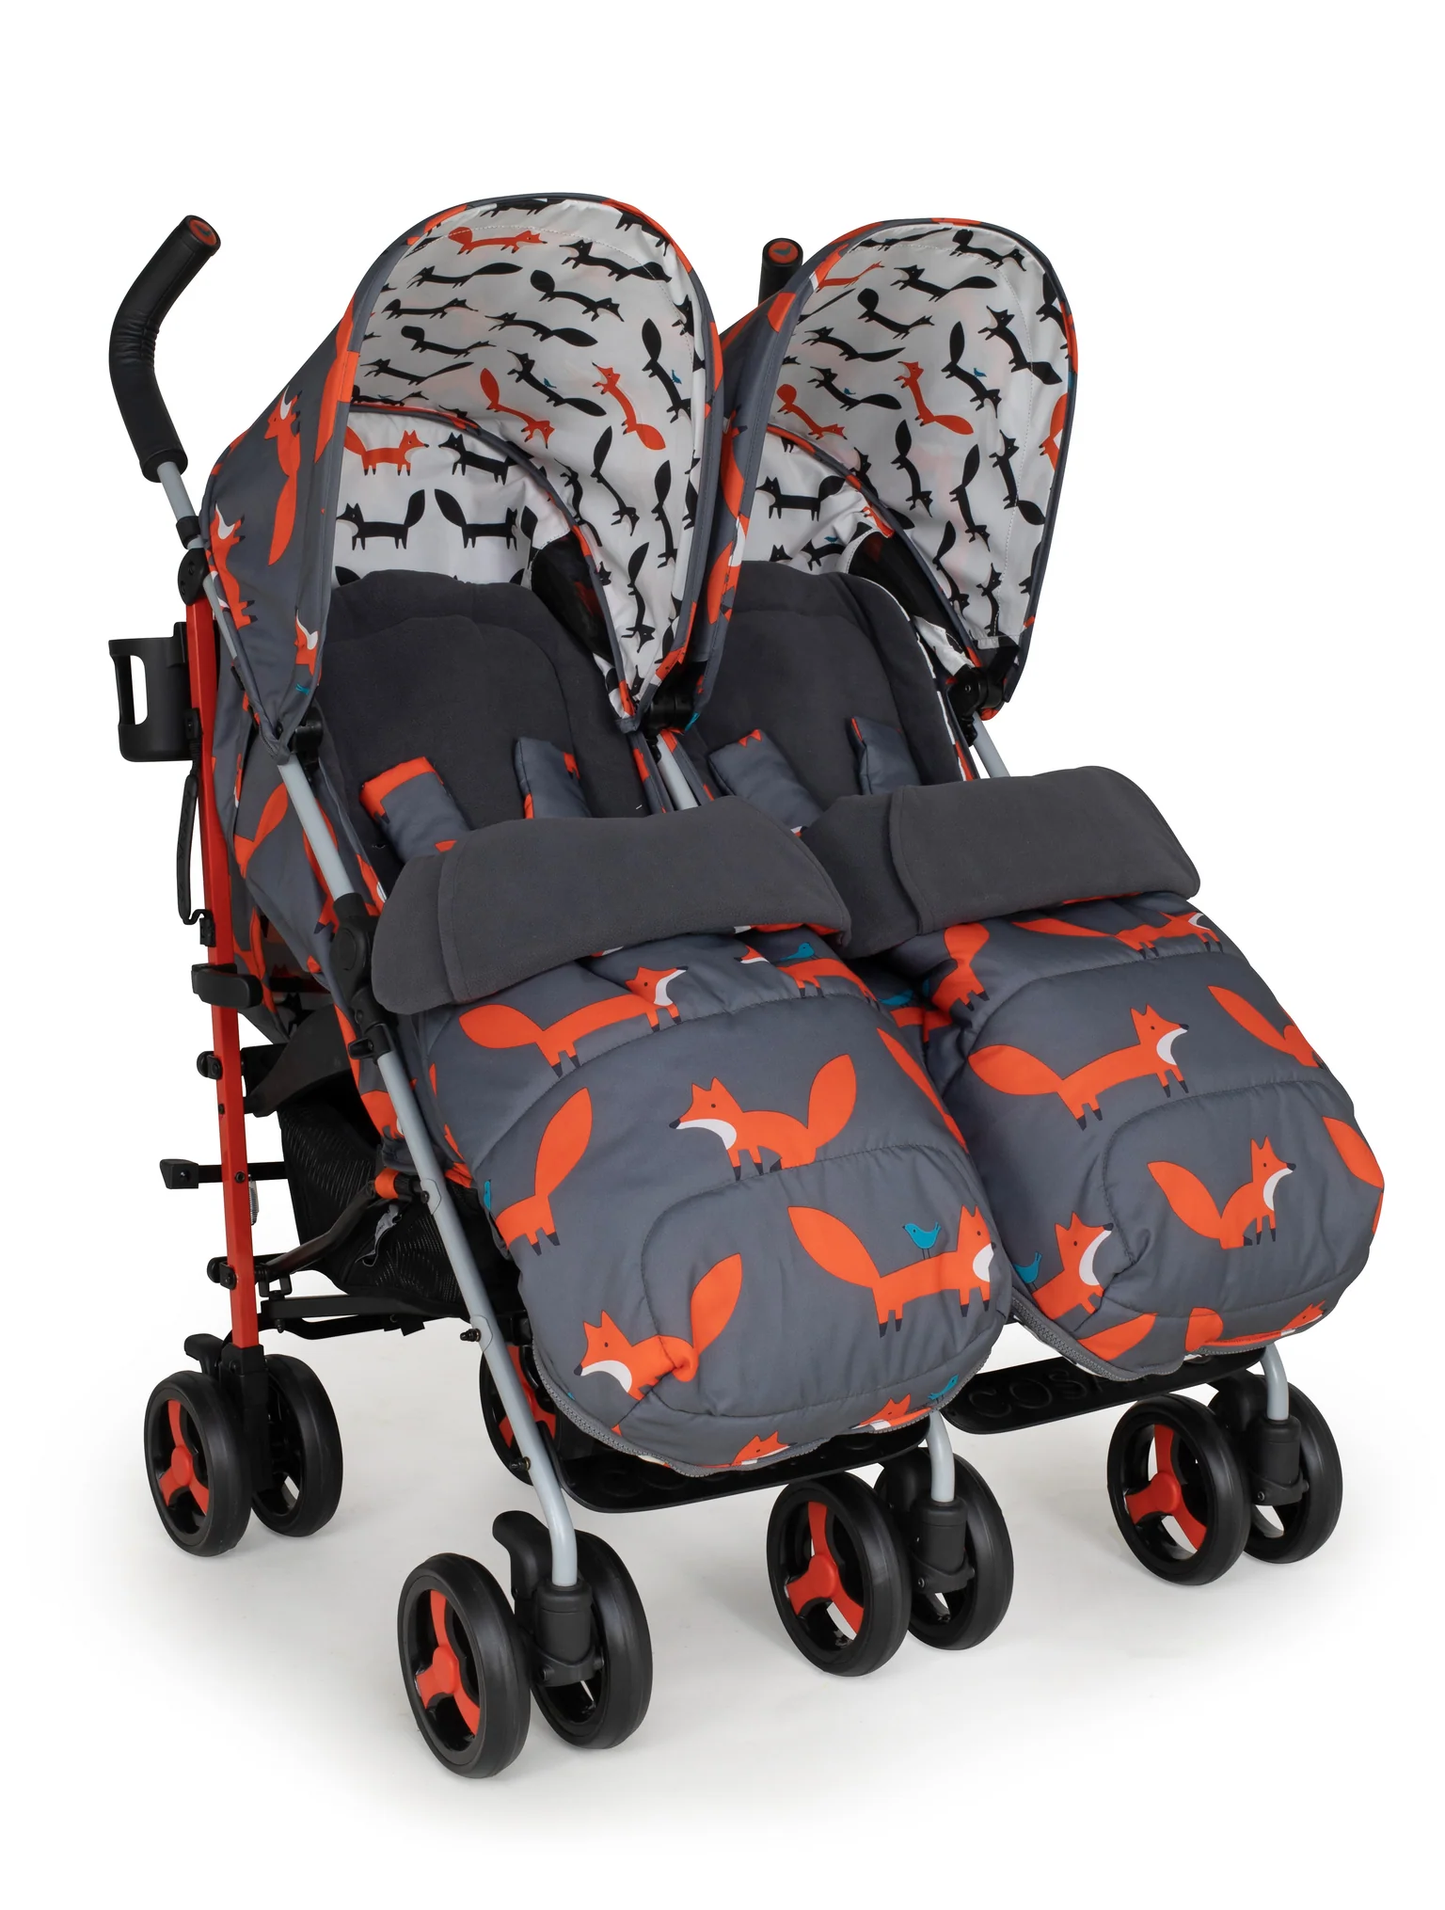 Cosatto Supa Dupa 3 Double Stroller - Charcoal Mister Fox-4